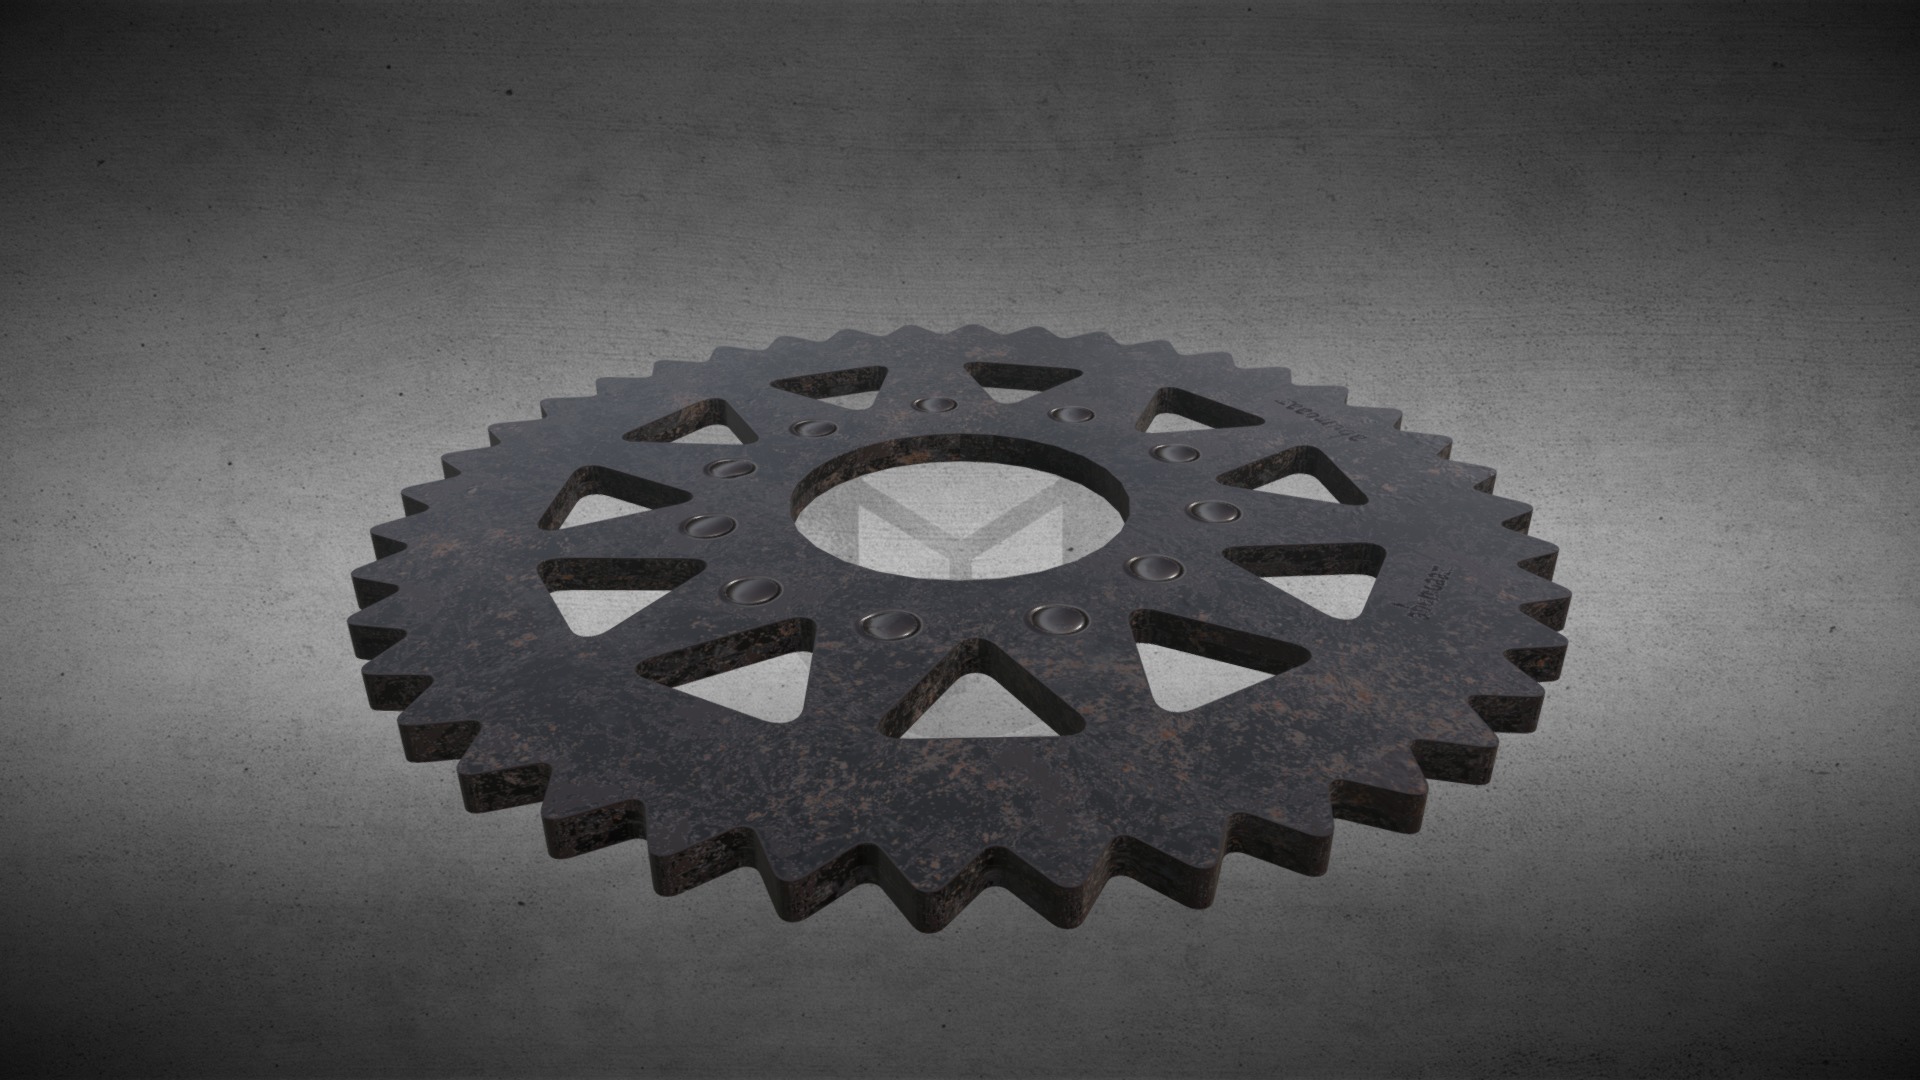 3D model Gears Animation - This is a 3D model of the Gears Animation. The 3D model is about a puzzle on a table.